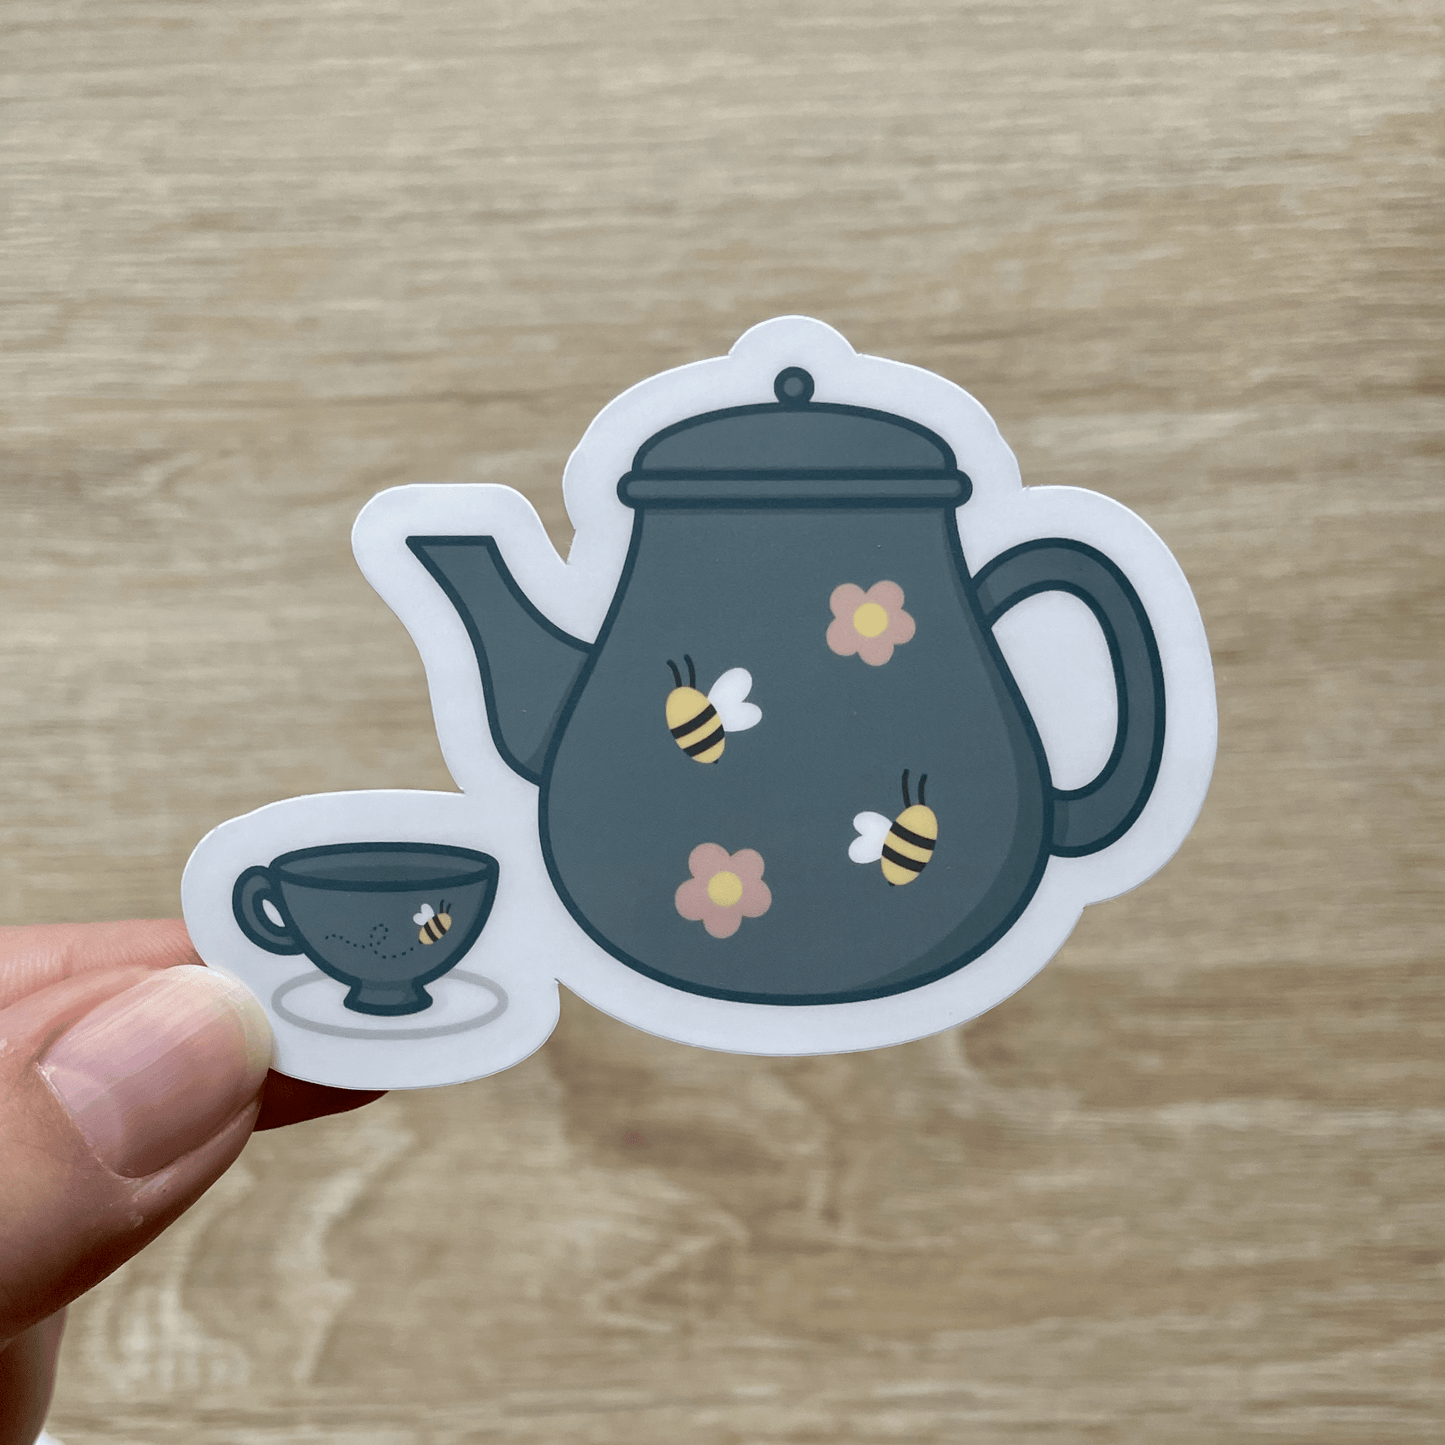 Teapot and Teacup Sticker